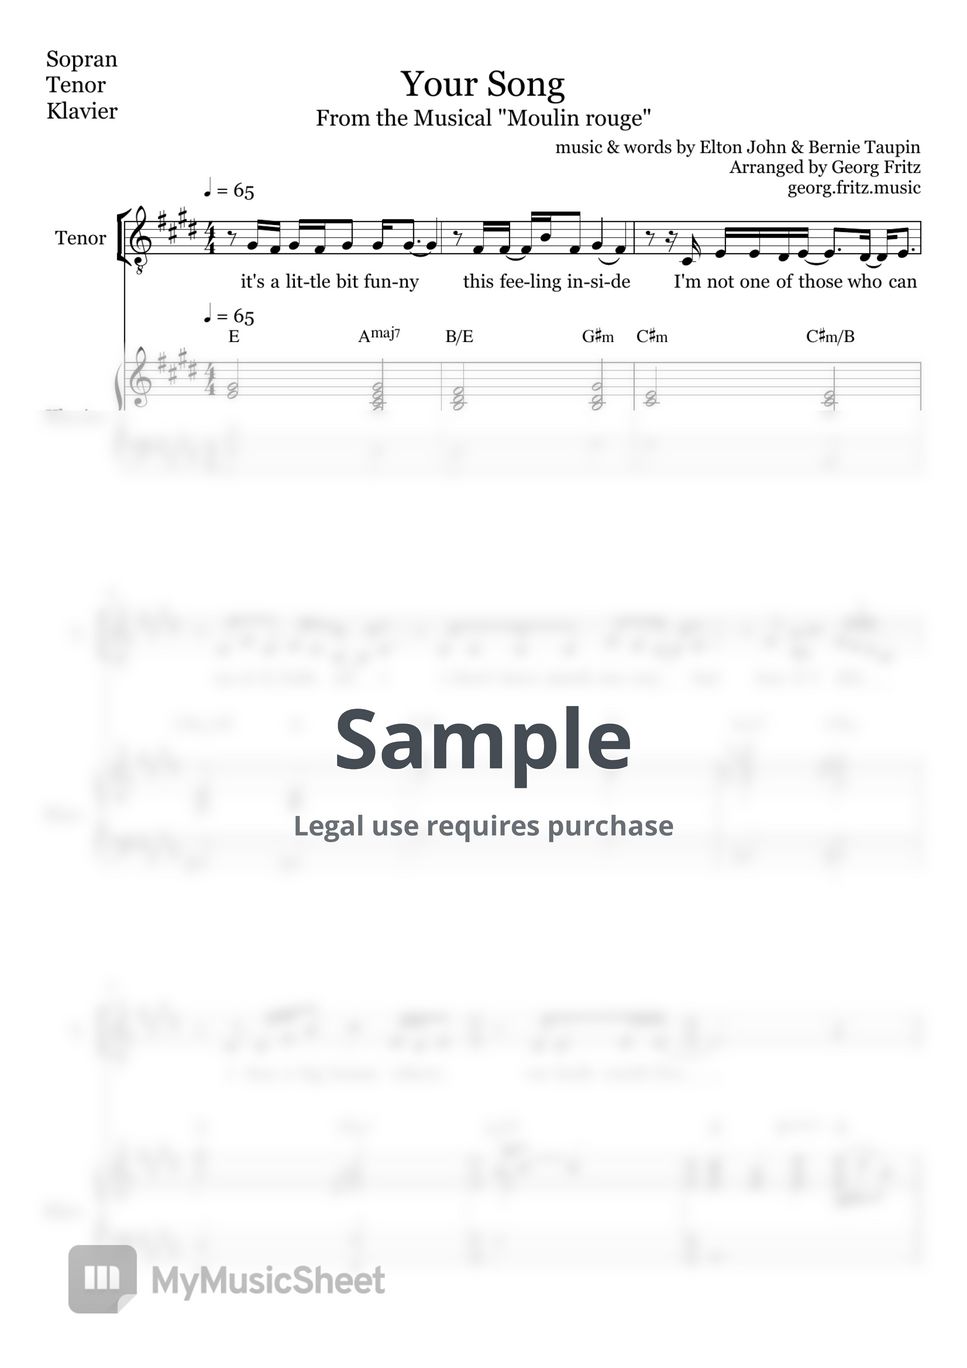 Your Song' Piano Sheet music for Piano (Solo)